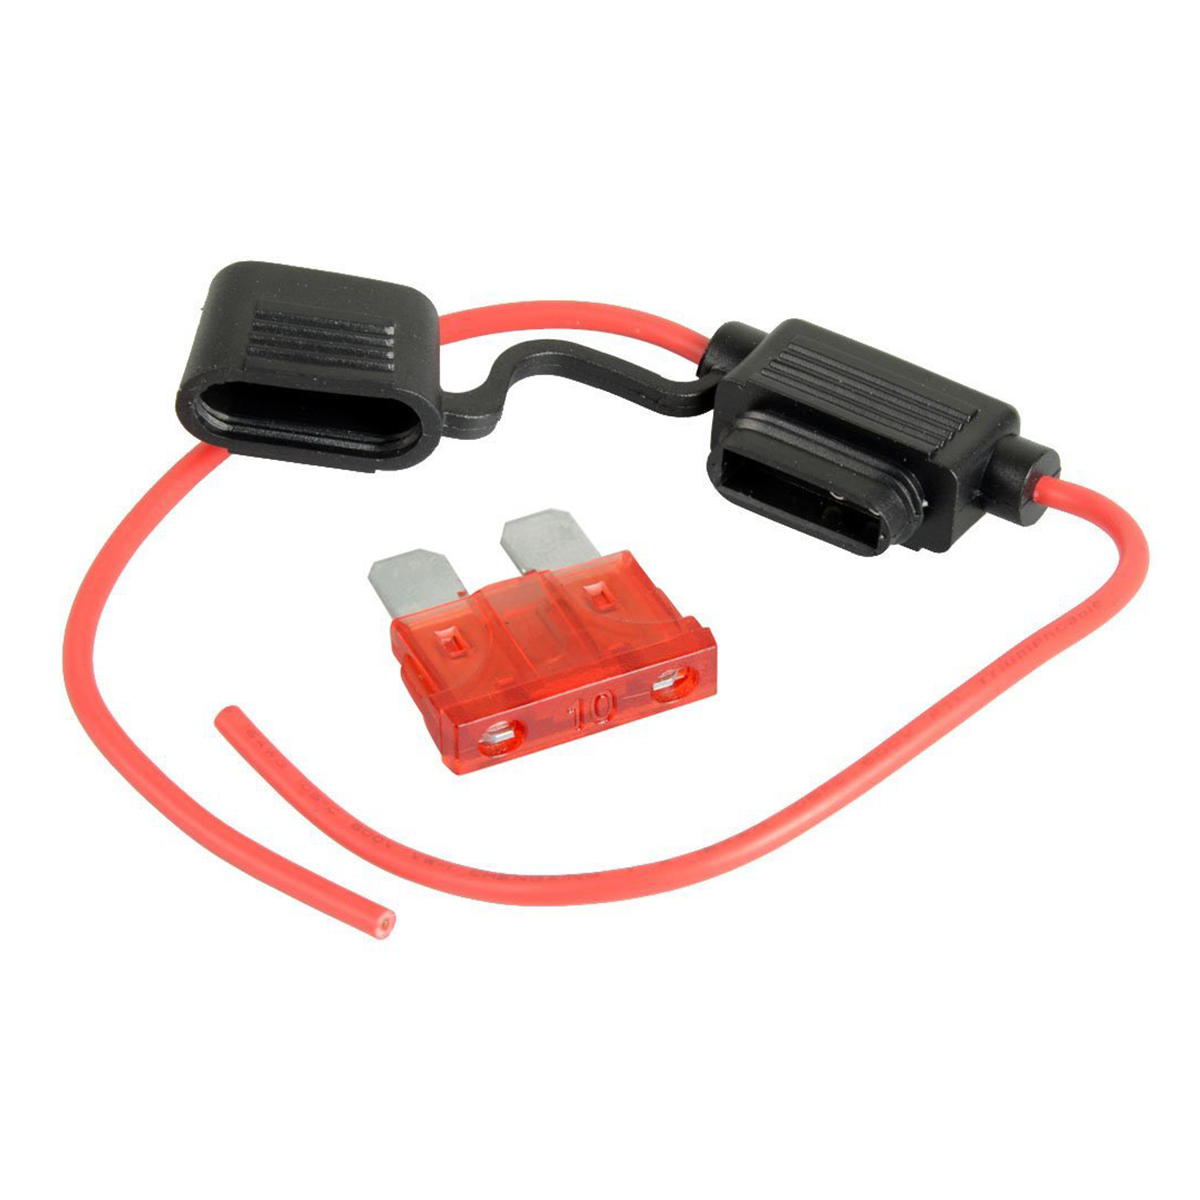 12V ATO ATC Add A Circuit Fuse Tap Piggy Back Standard Blade Fuse Holder with 10A Blade Fuse - Size M